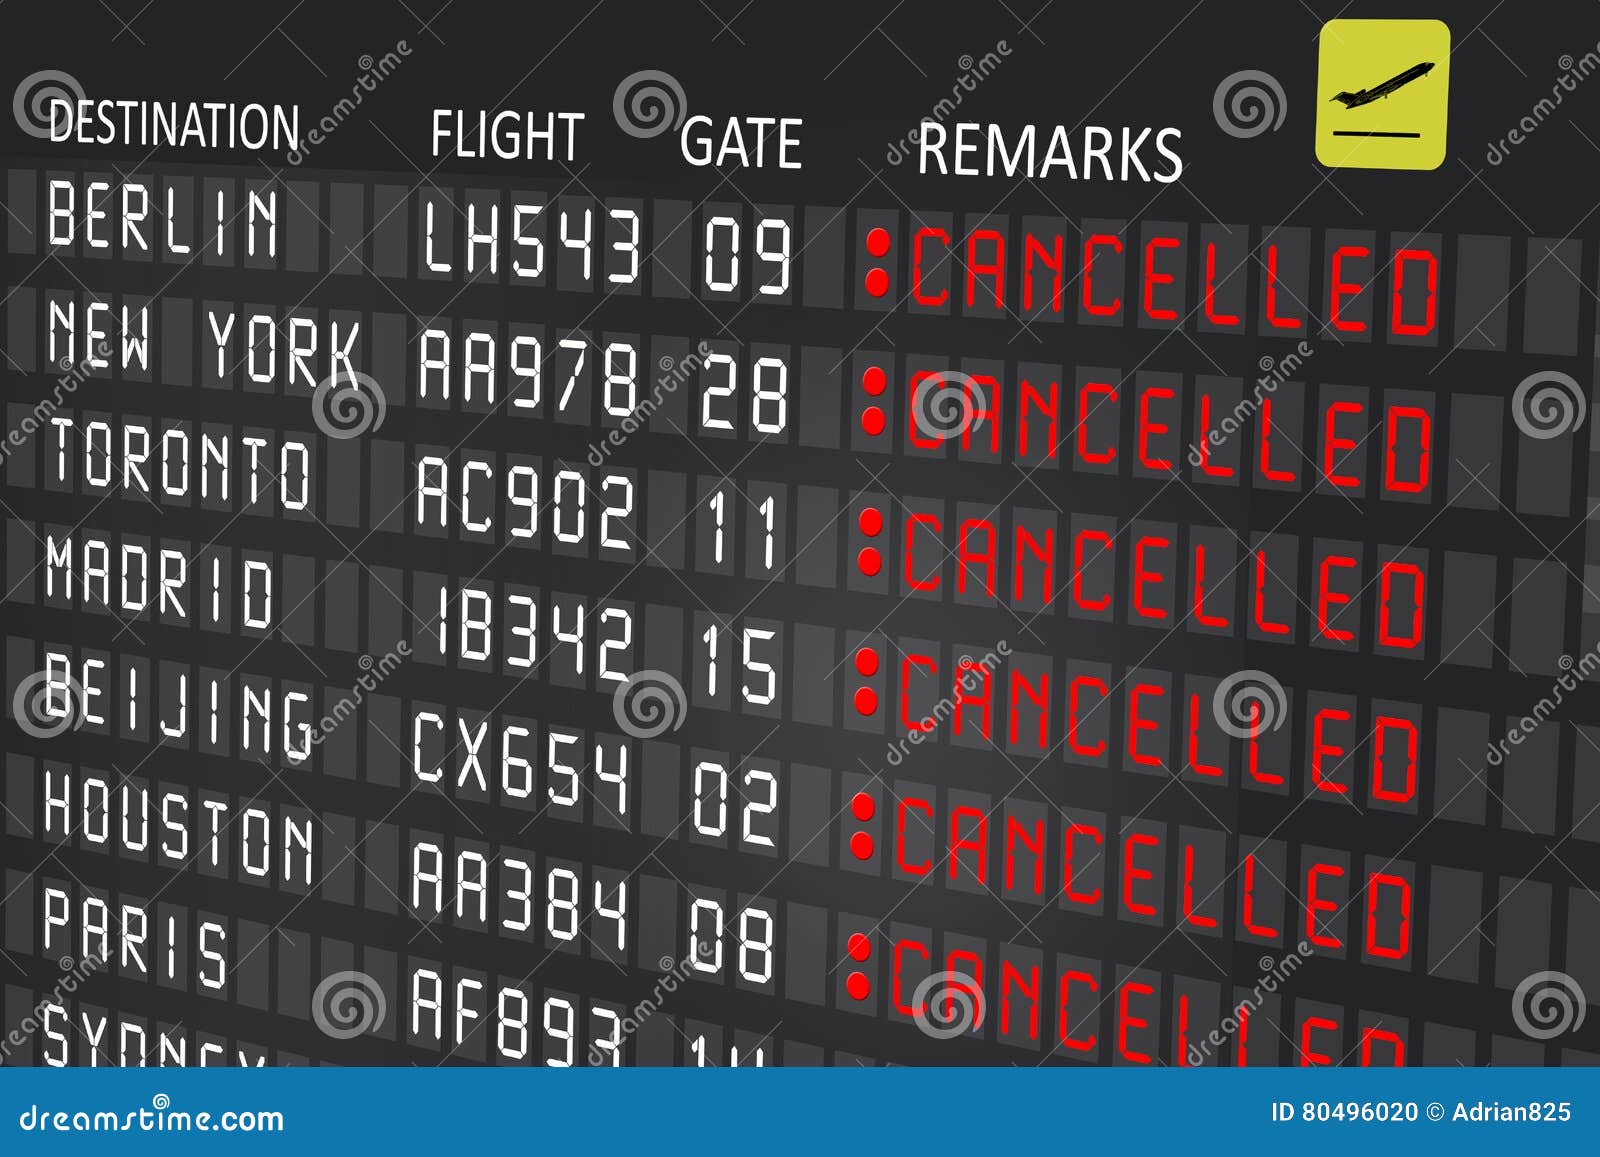 airport billboard panel with cancelled flights